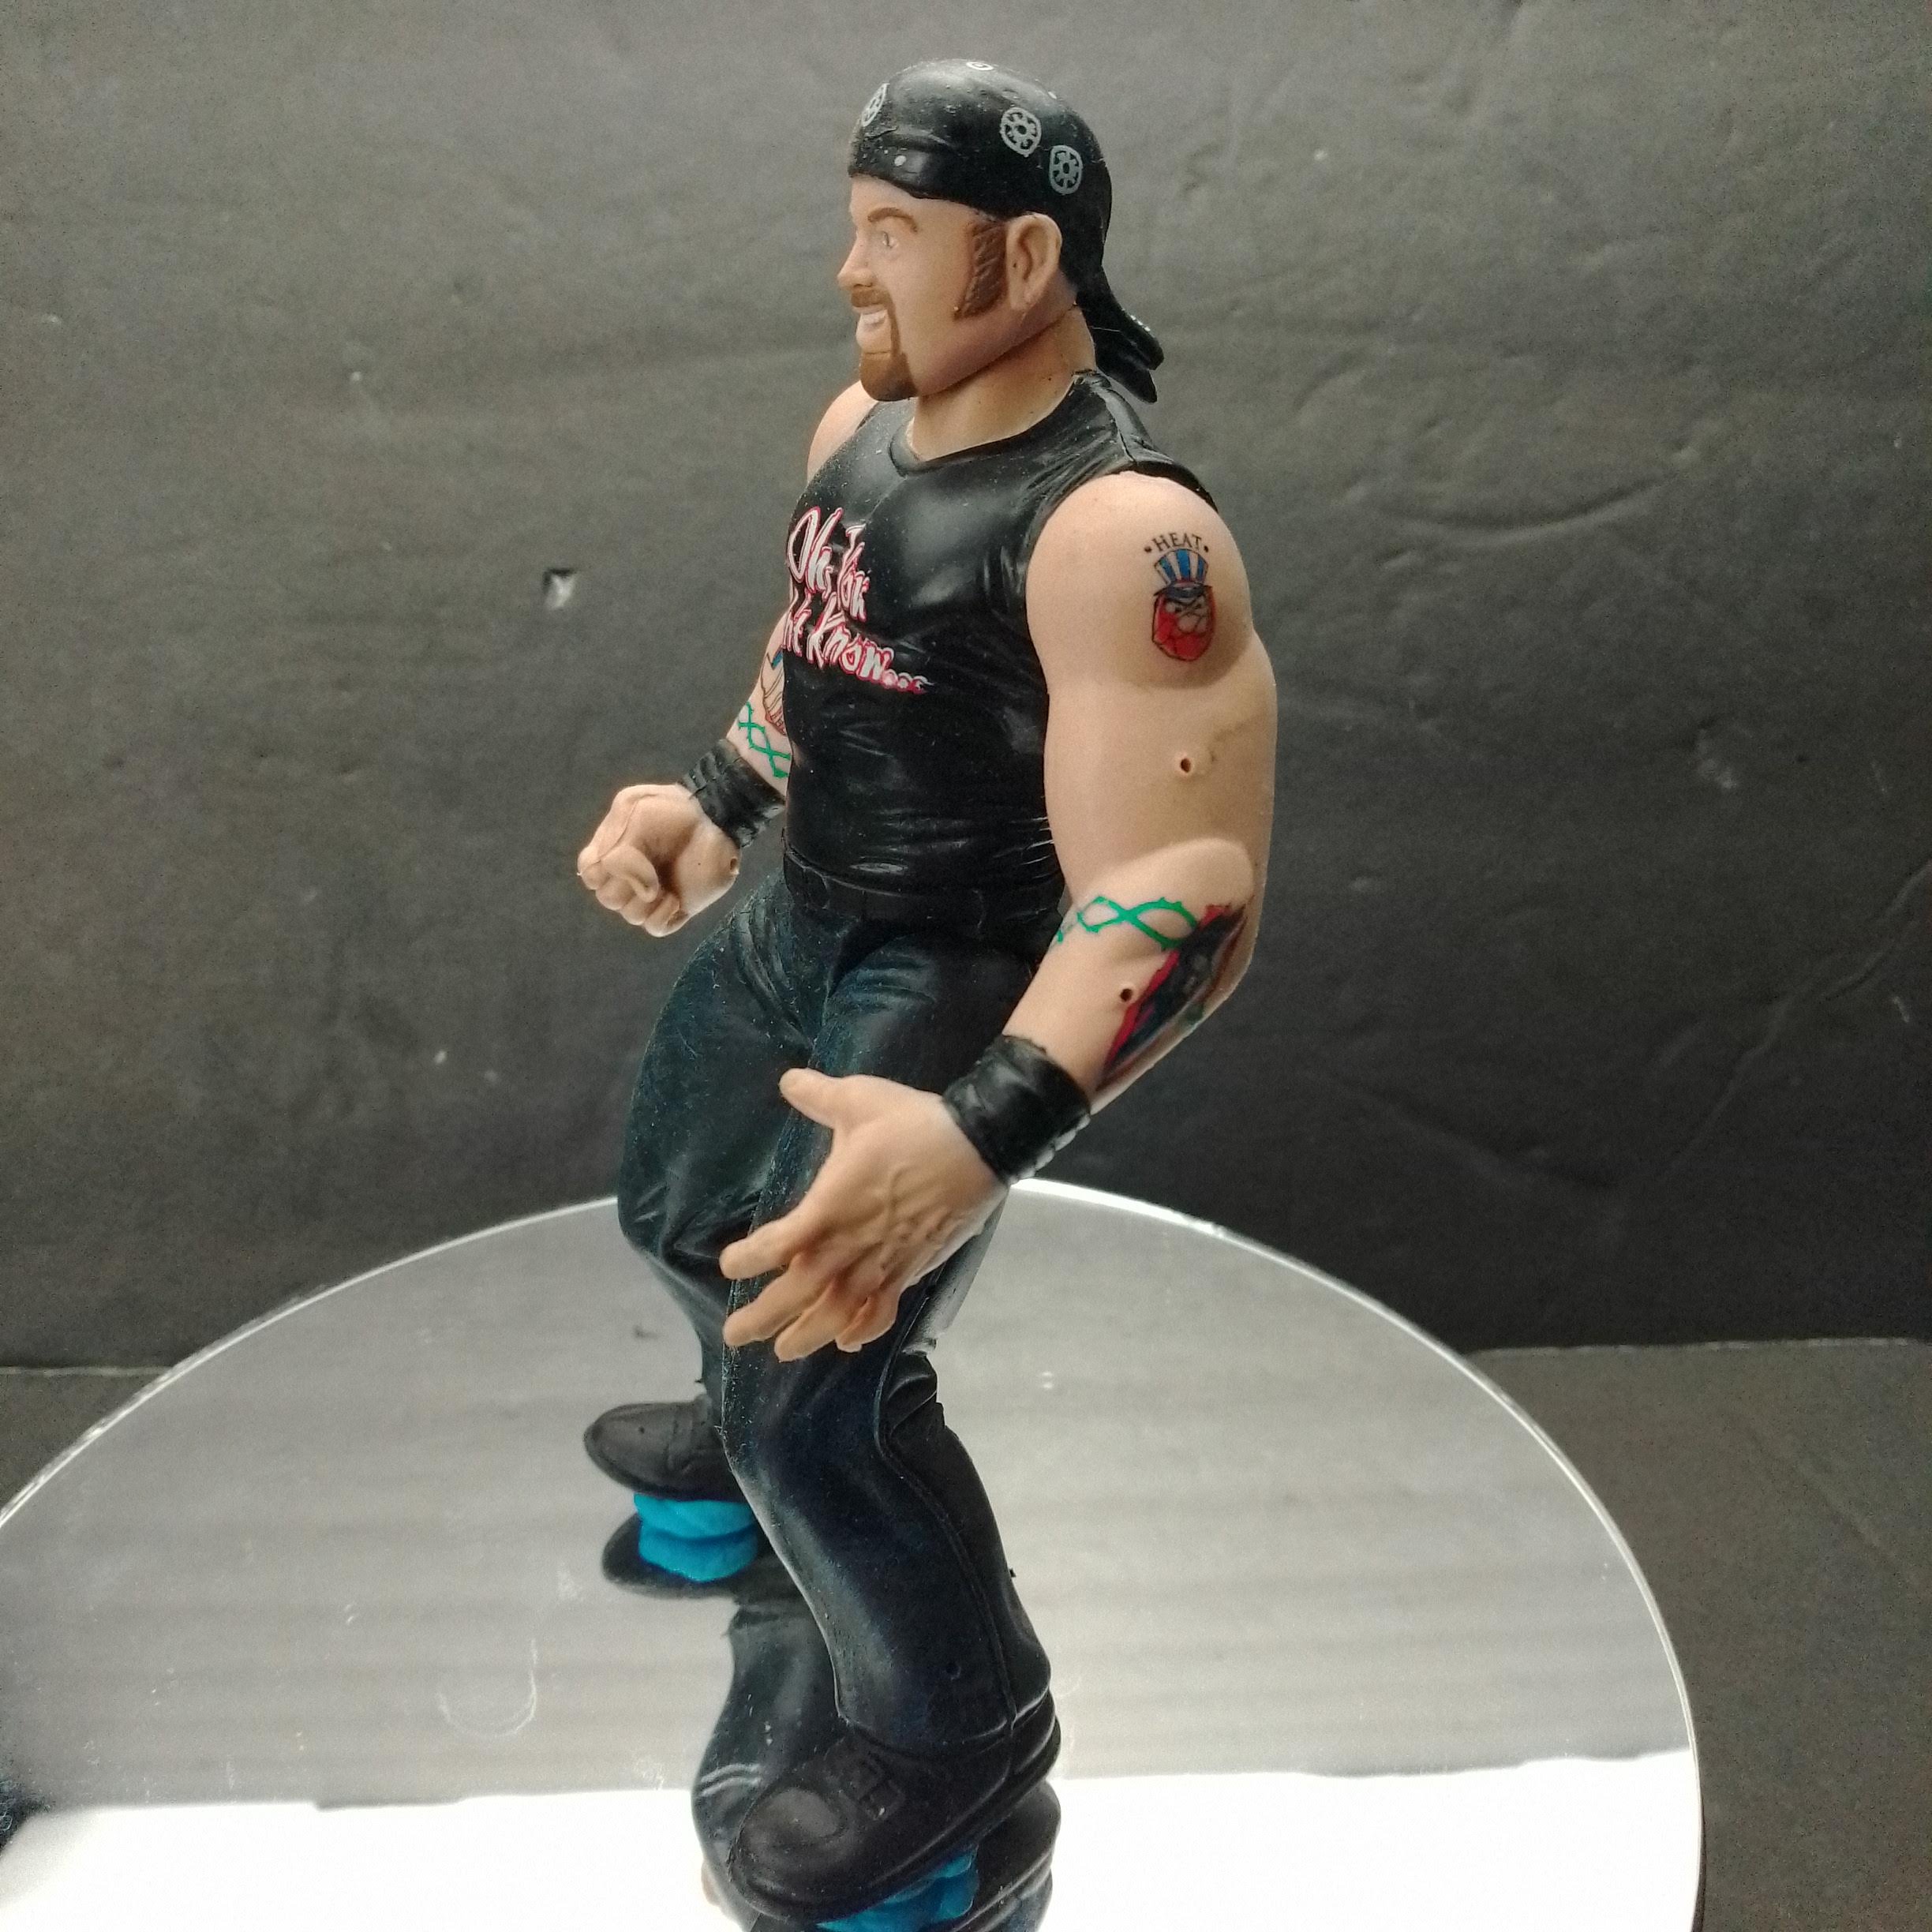 1999 Jakks Road Dogg Jesse James Wrestling Action Figure with black T shirt Oh You didn't know for sale side